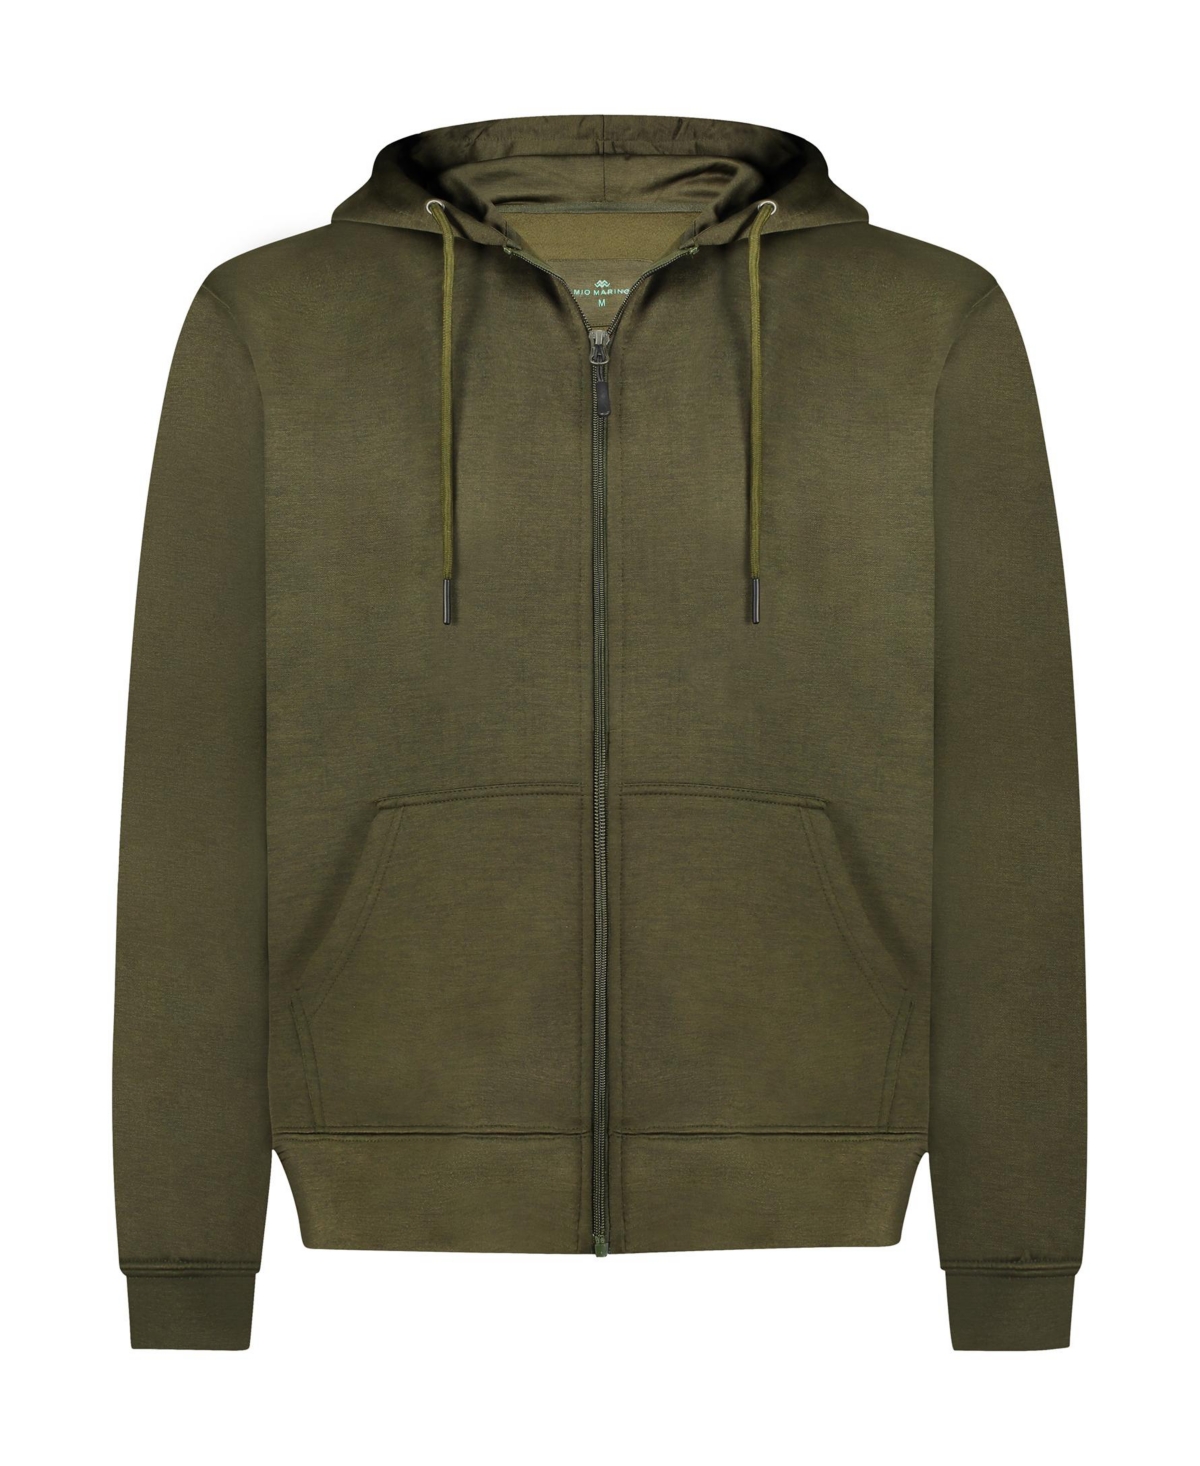 Premium Zip-Up Hoodie for Men with Smooth Silky Matte Finish & Cozy Fleece Inner Lining - Men's Sweater with Hood - Army green